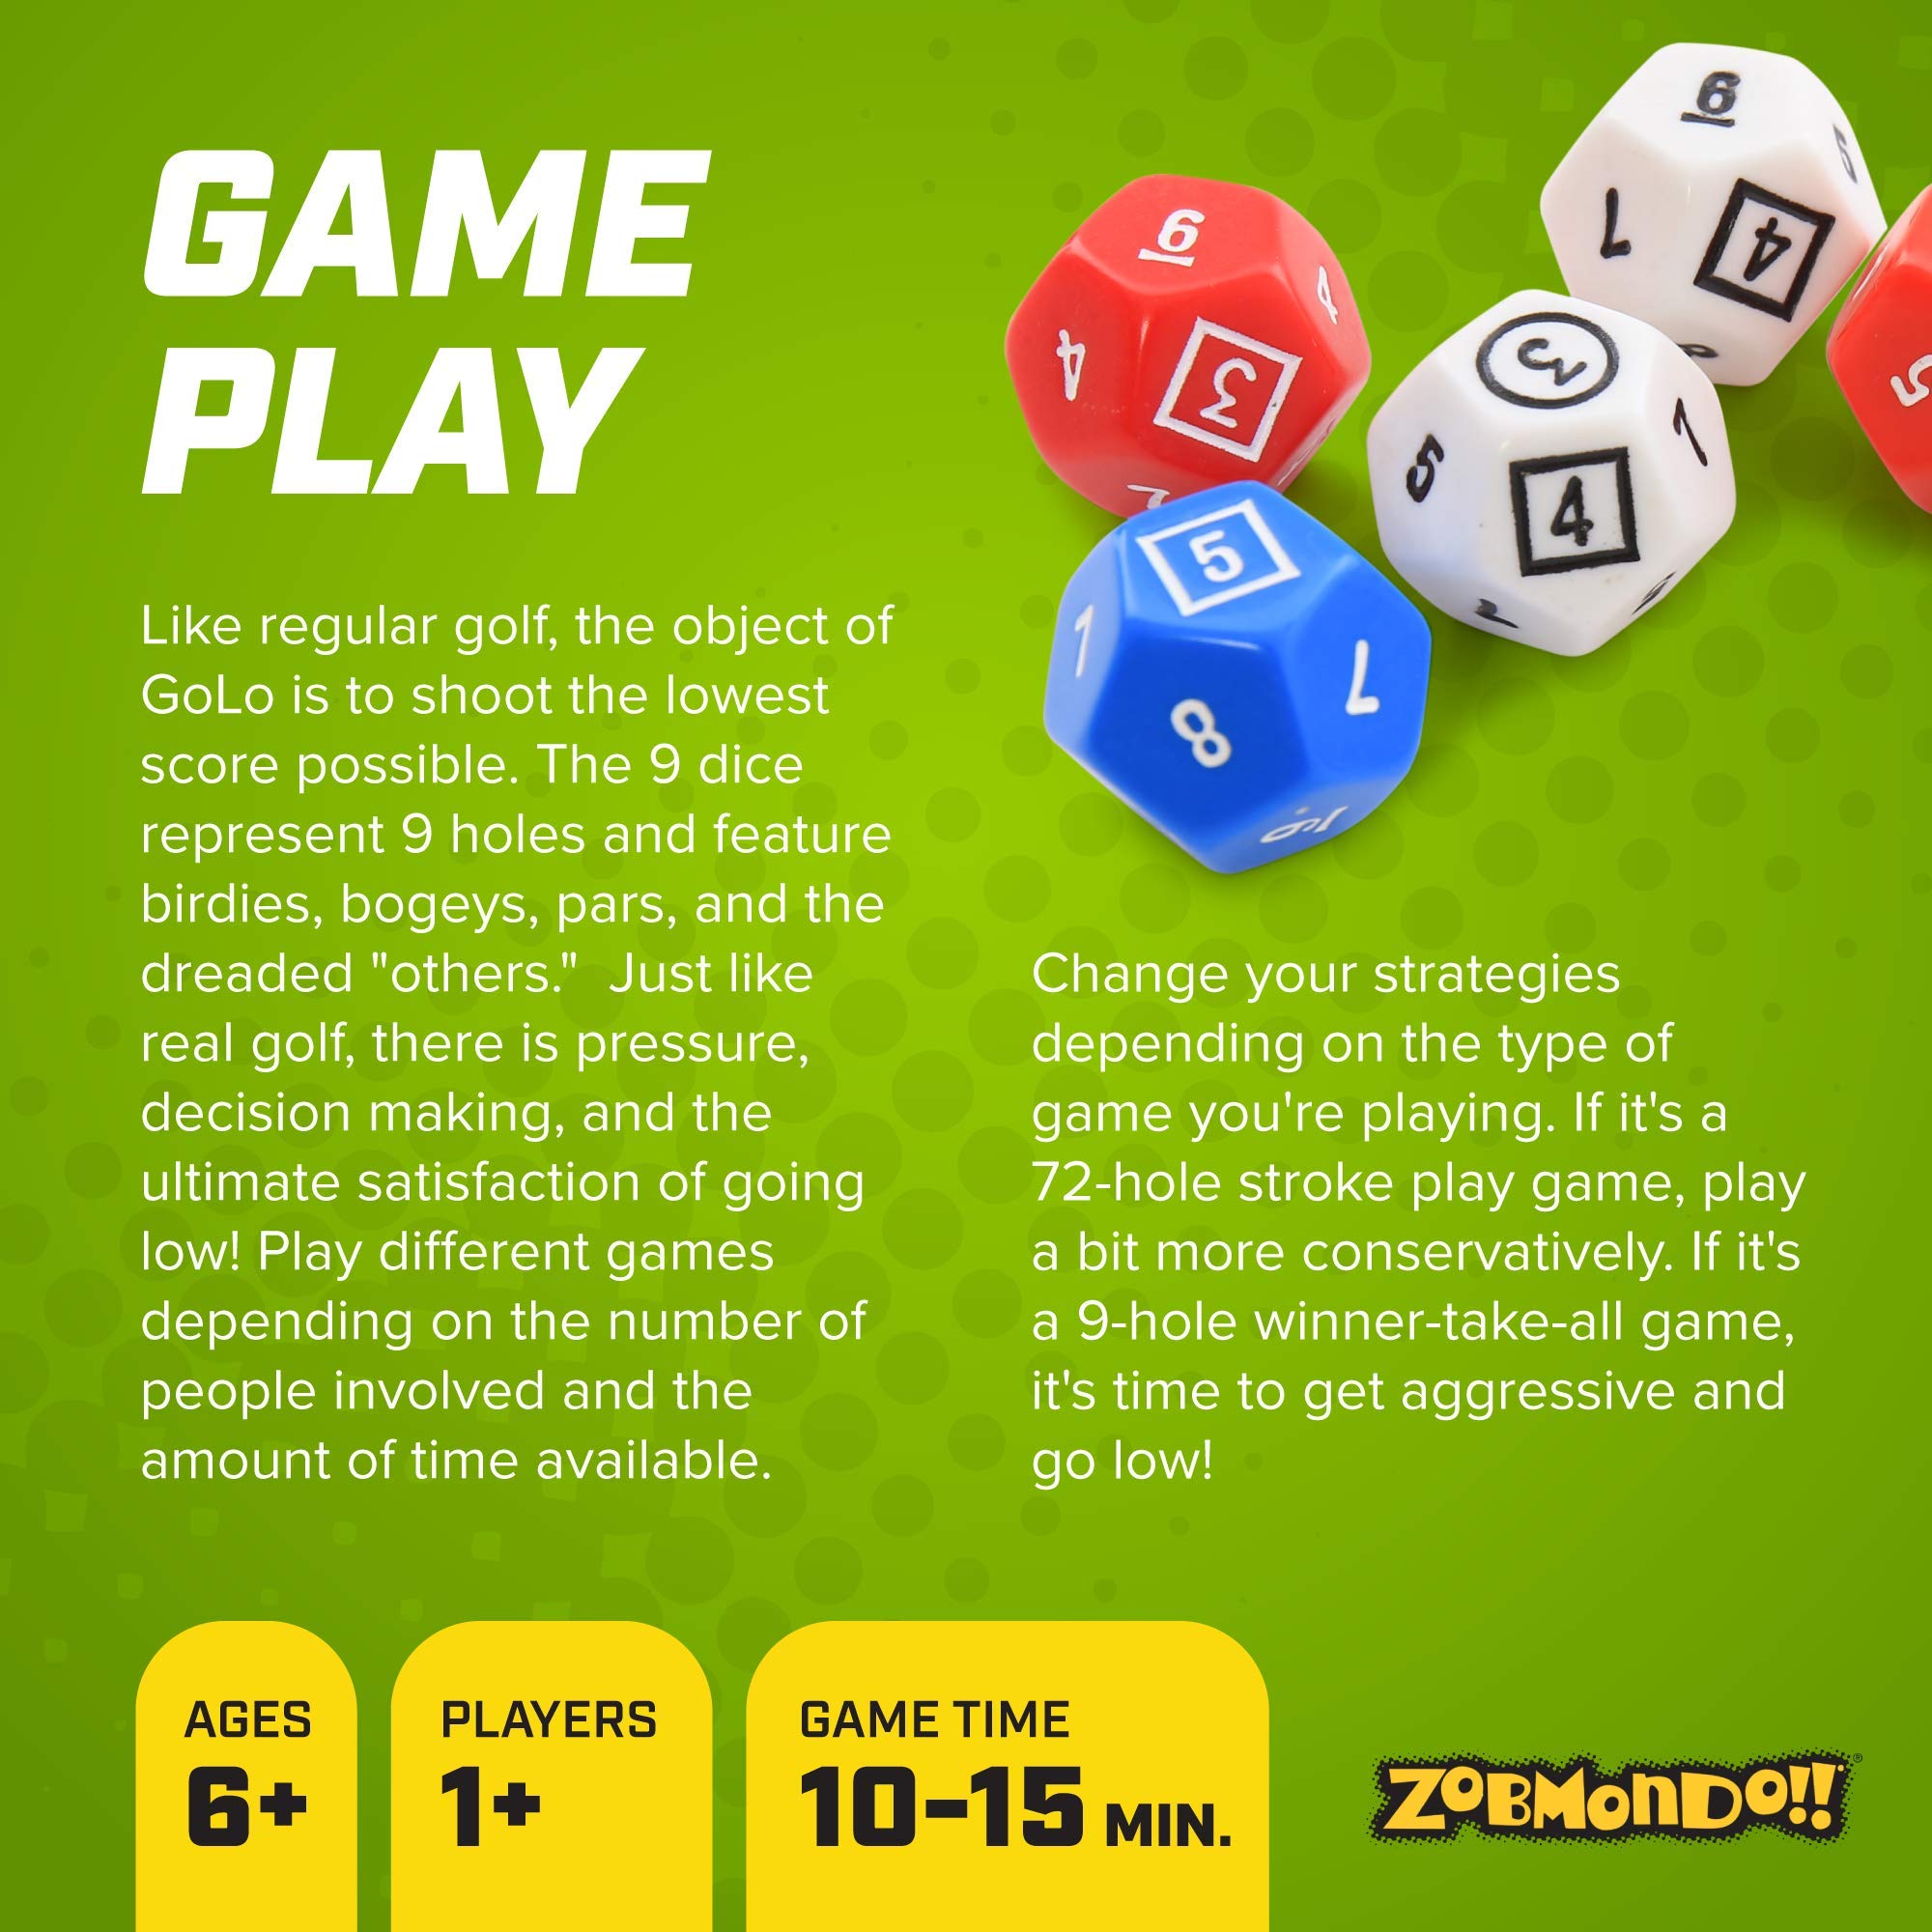 Zobmondo!! GoLo! Golf Dice Game for Families and Kids, Award-Winning Fun Game for Home or Travel, Quick to Learn, For 1+ Players, Ages 6 and Up